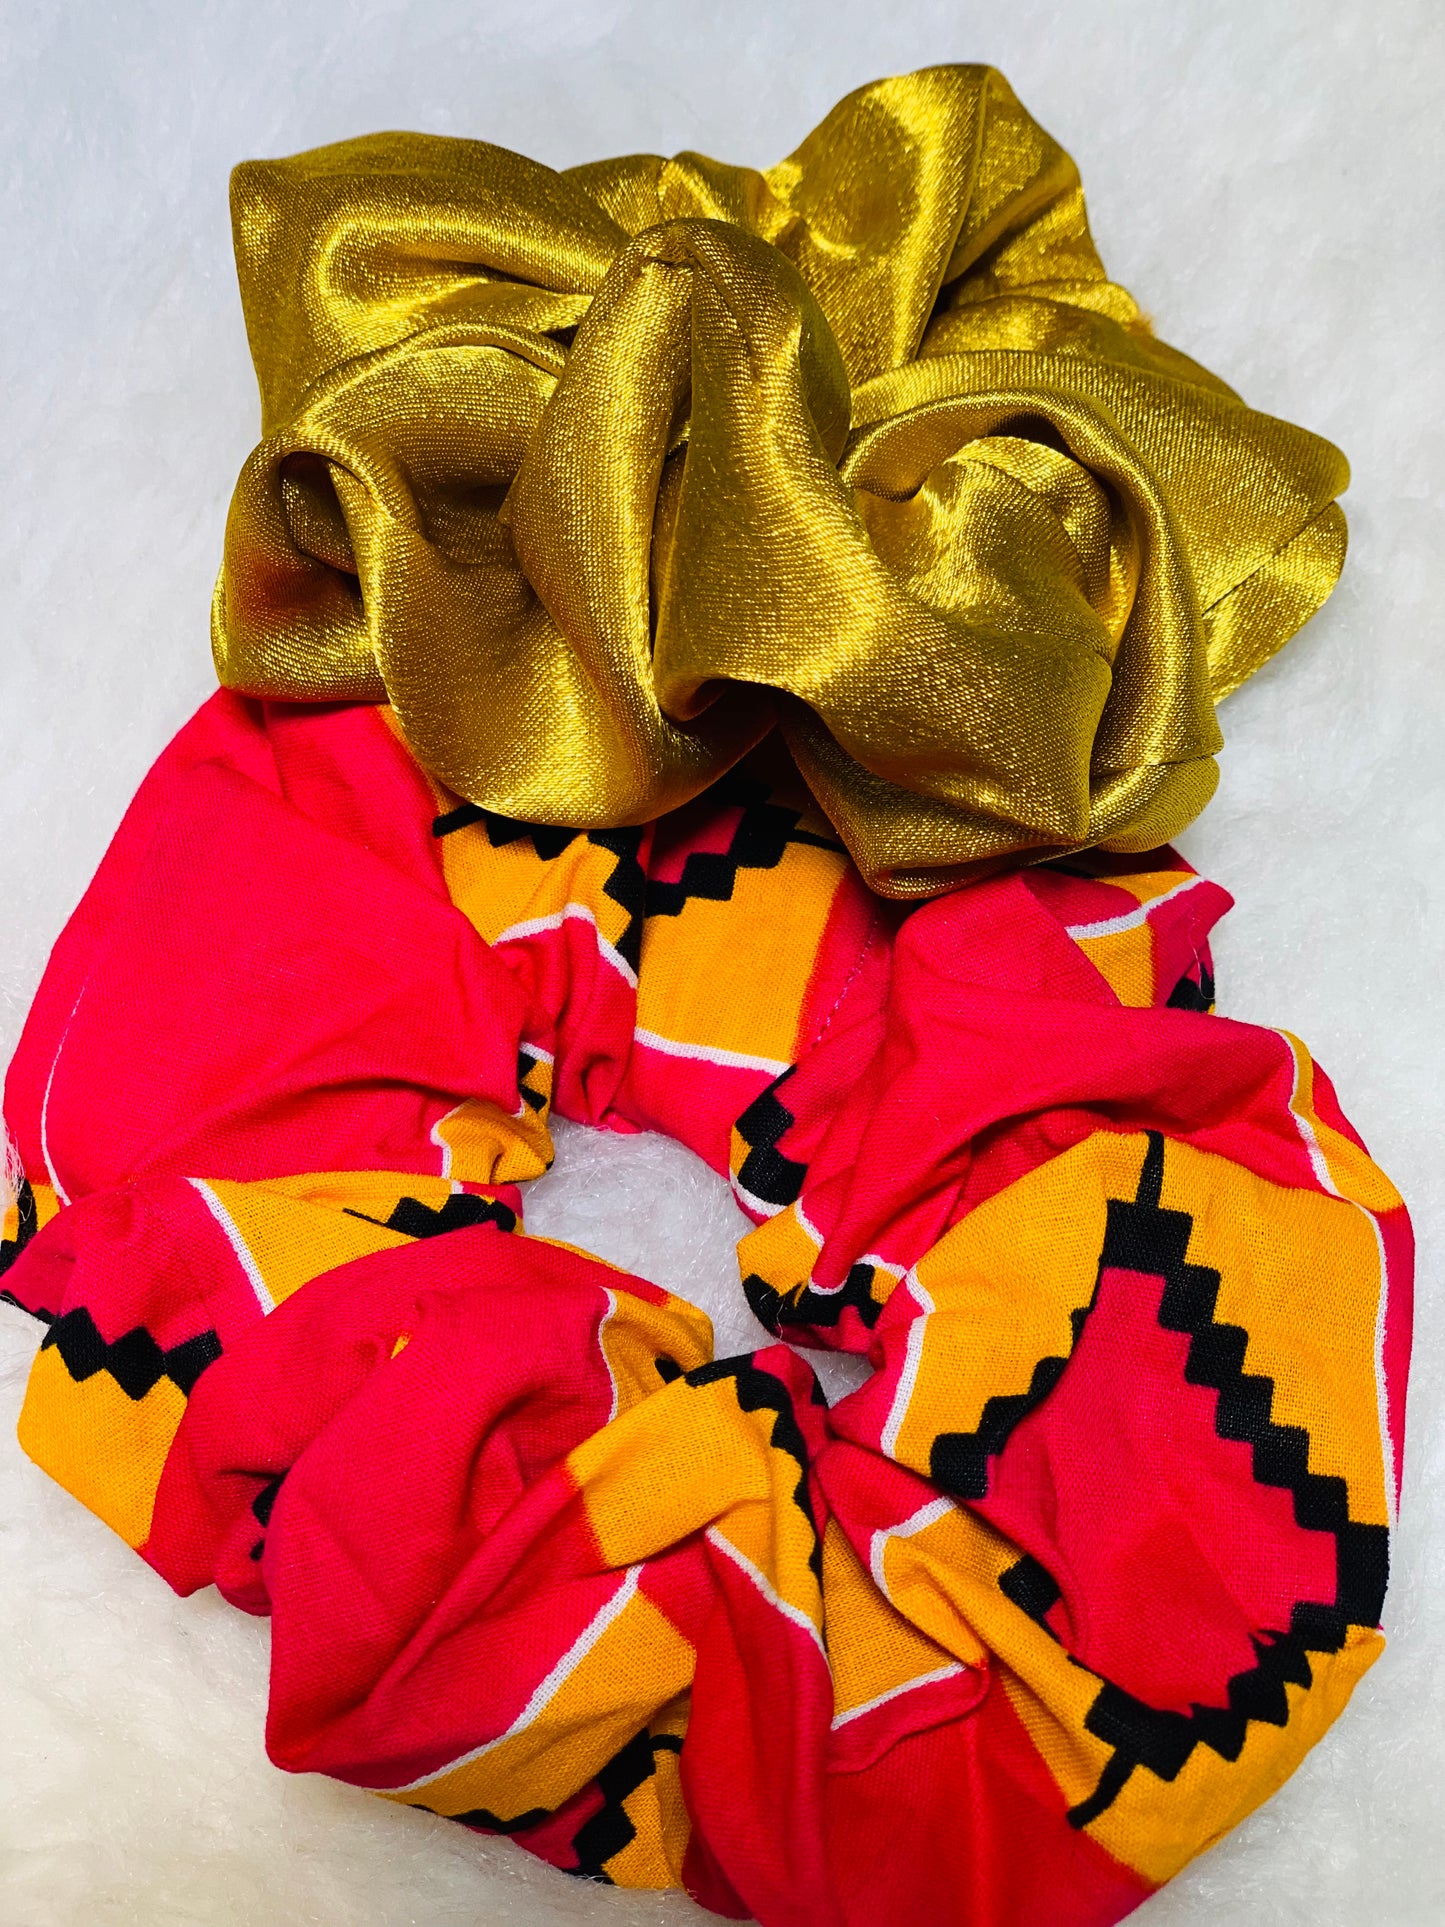 One Gold Small Scrunchie And One Red, Cream And Black Small Scrunchie